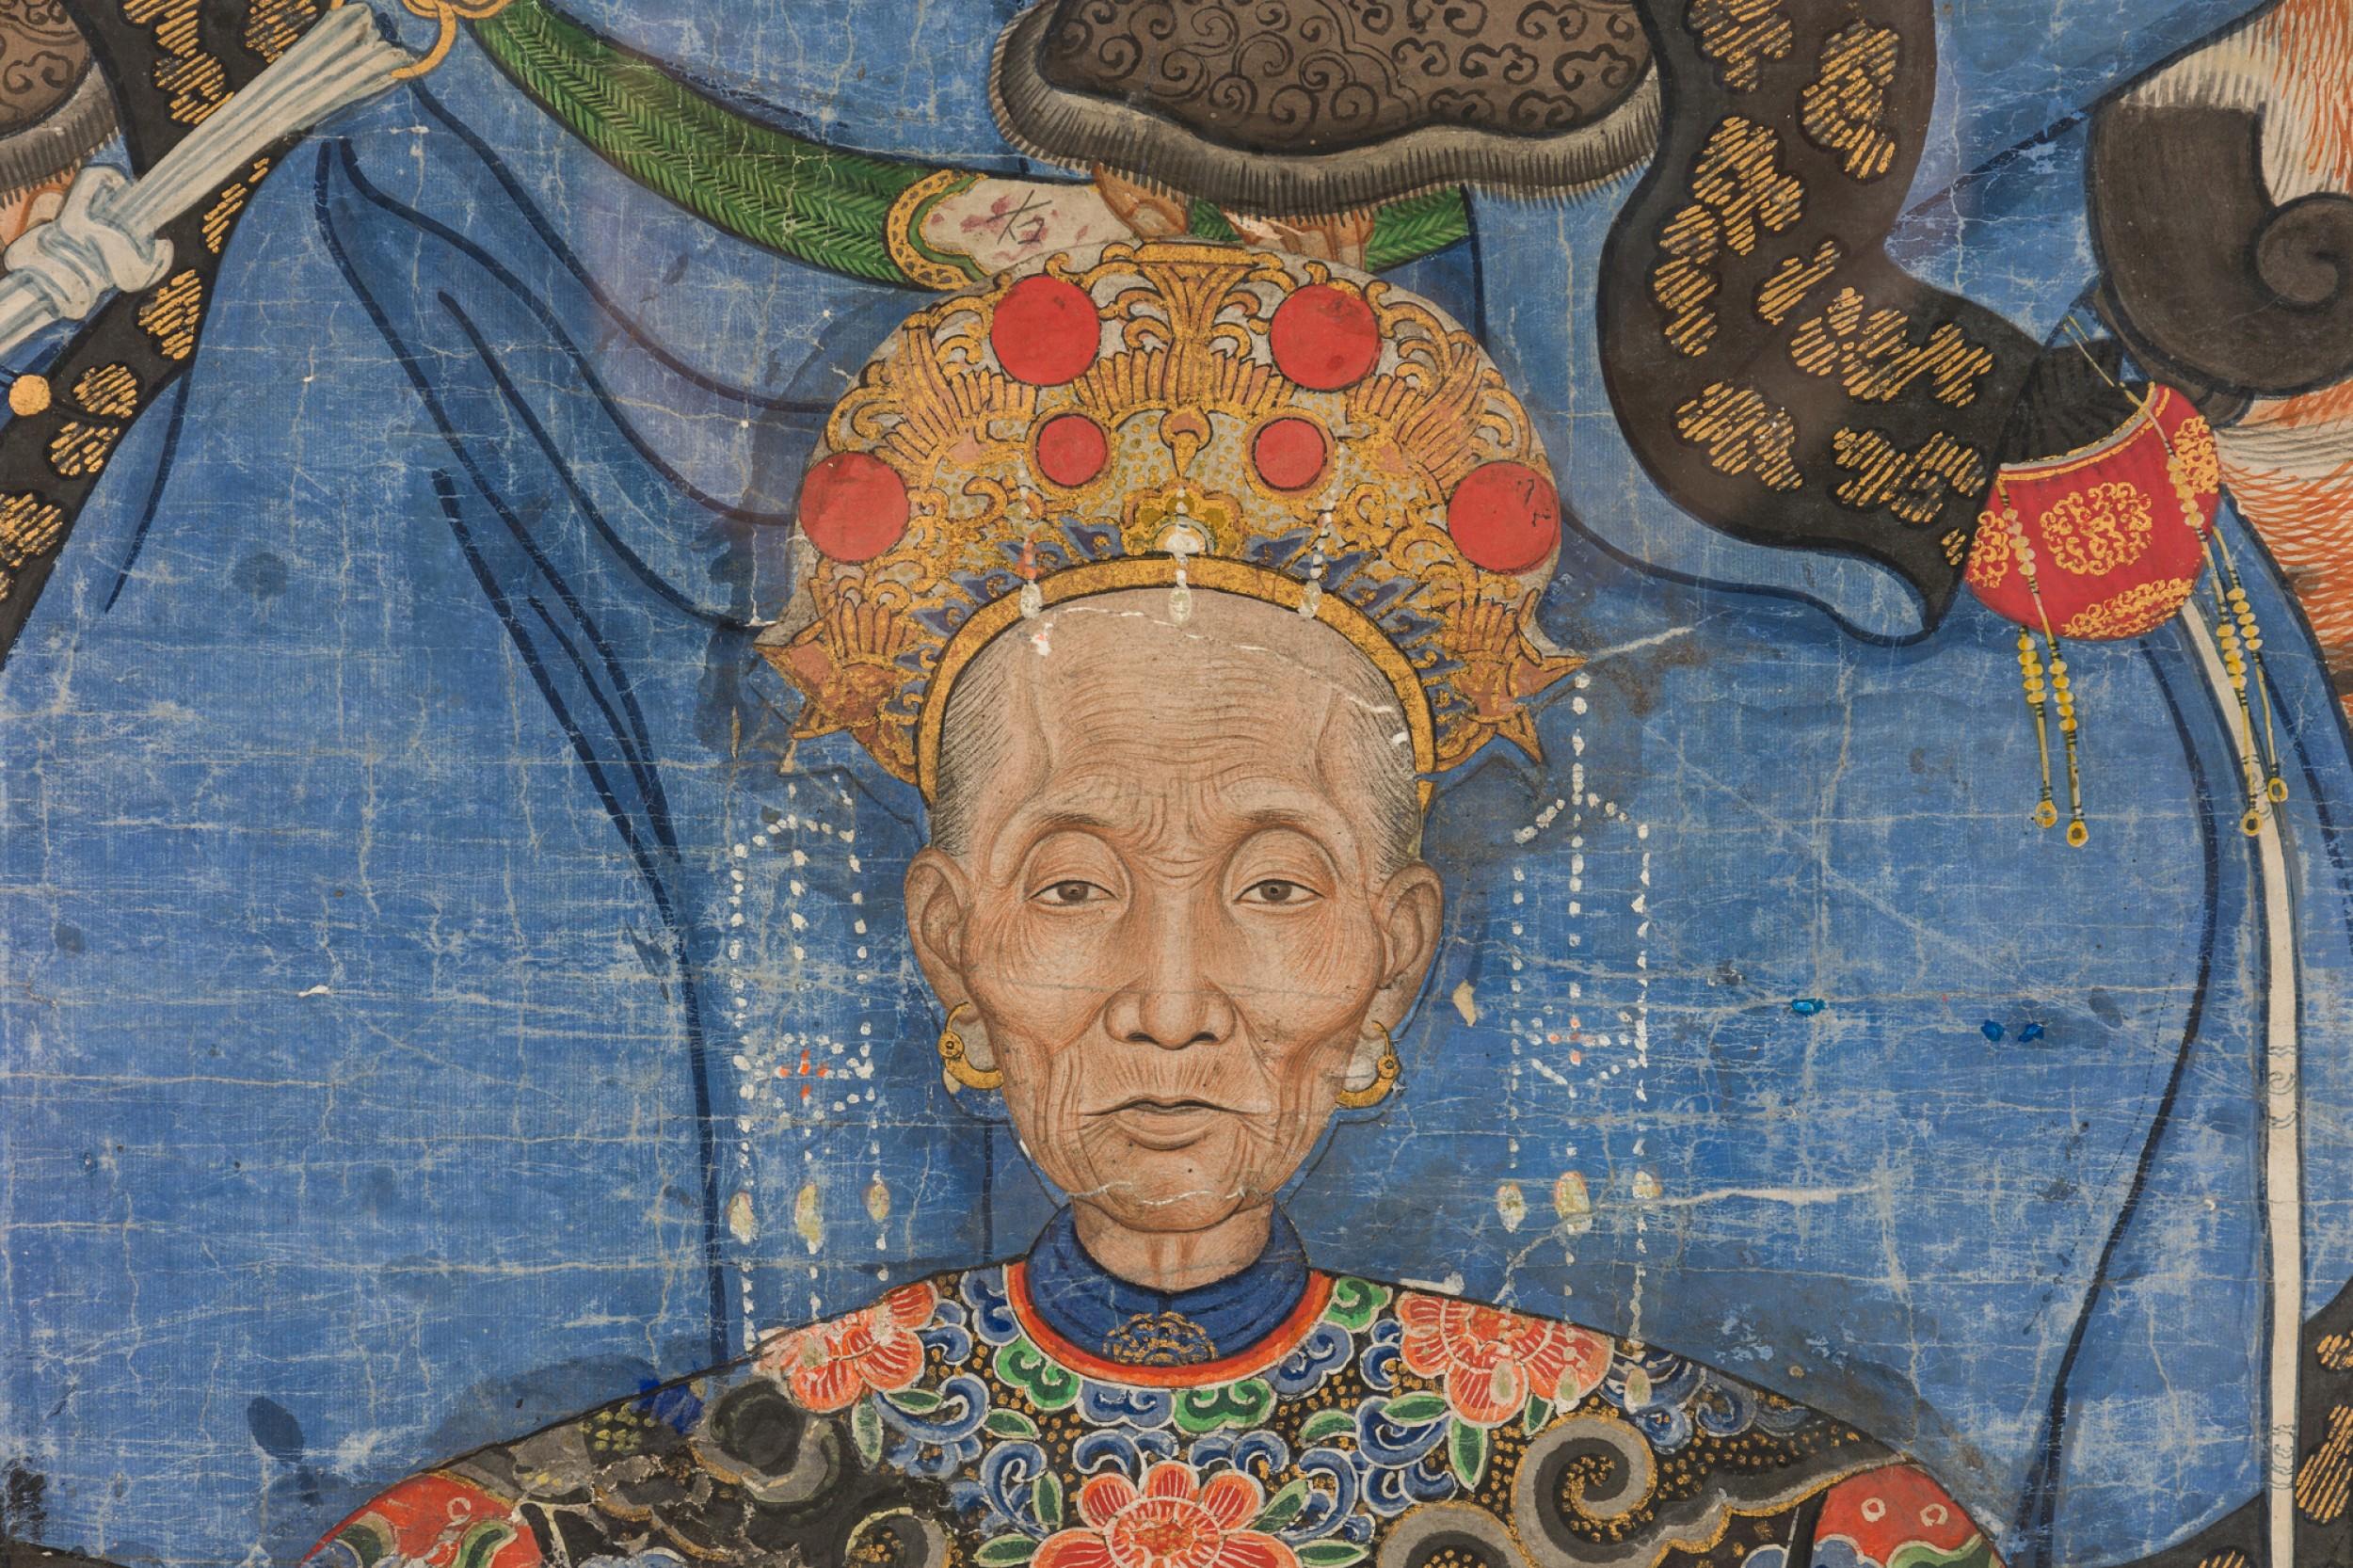 Antique Chinese ceremonial ancestor portrait featuring four elder figures in elaborately decorated blue and red robes on paper mounted in a rectangular wooden frame.